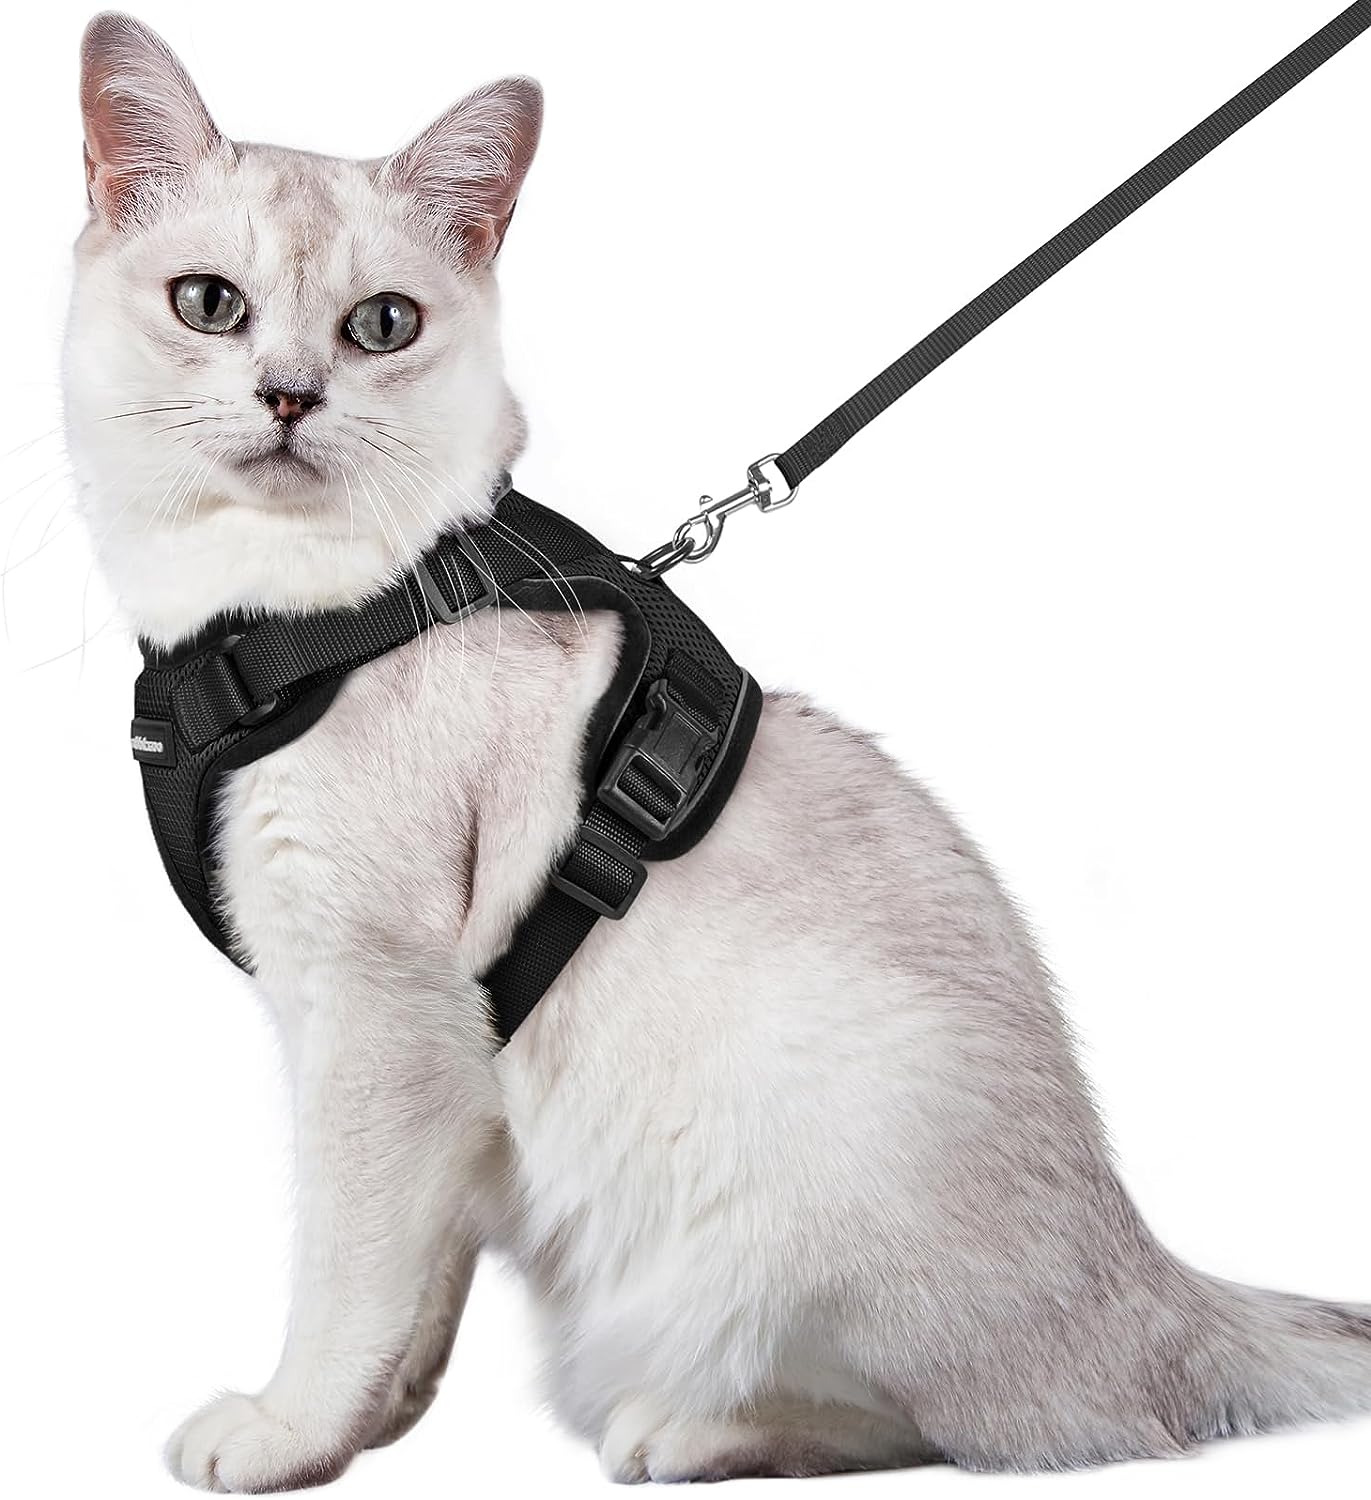 Cat Harness and Leash for Walking, Escape Proof Soft Adjustable Vest Harnesses for Cats, Easy Control Breathable Reflective Strips Jacket, Black, XS